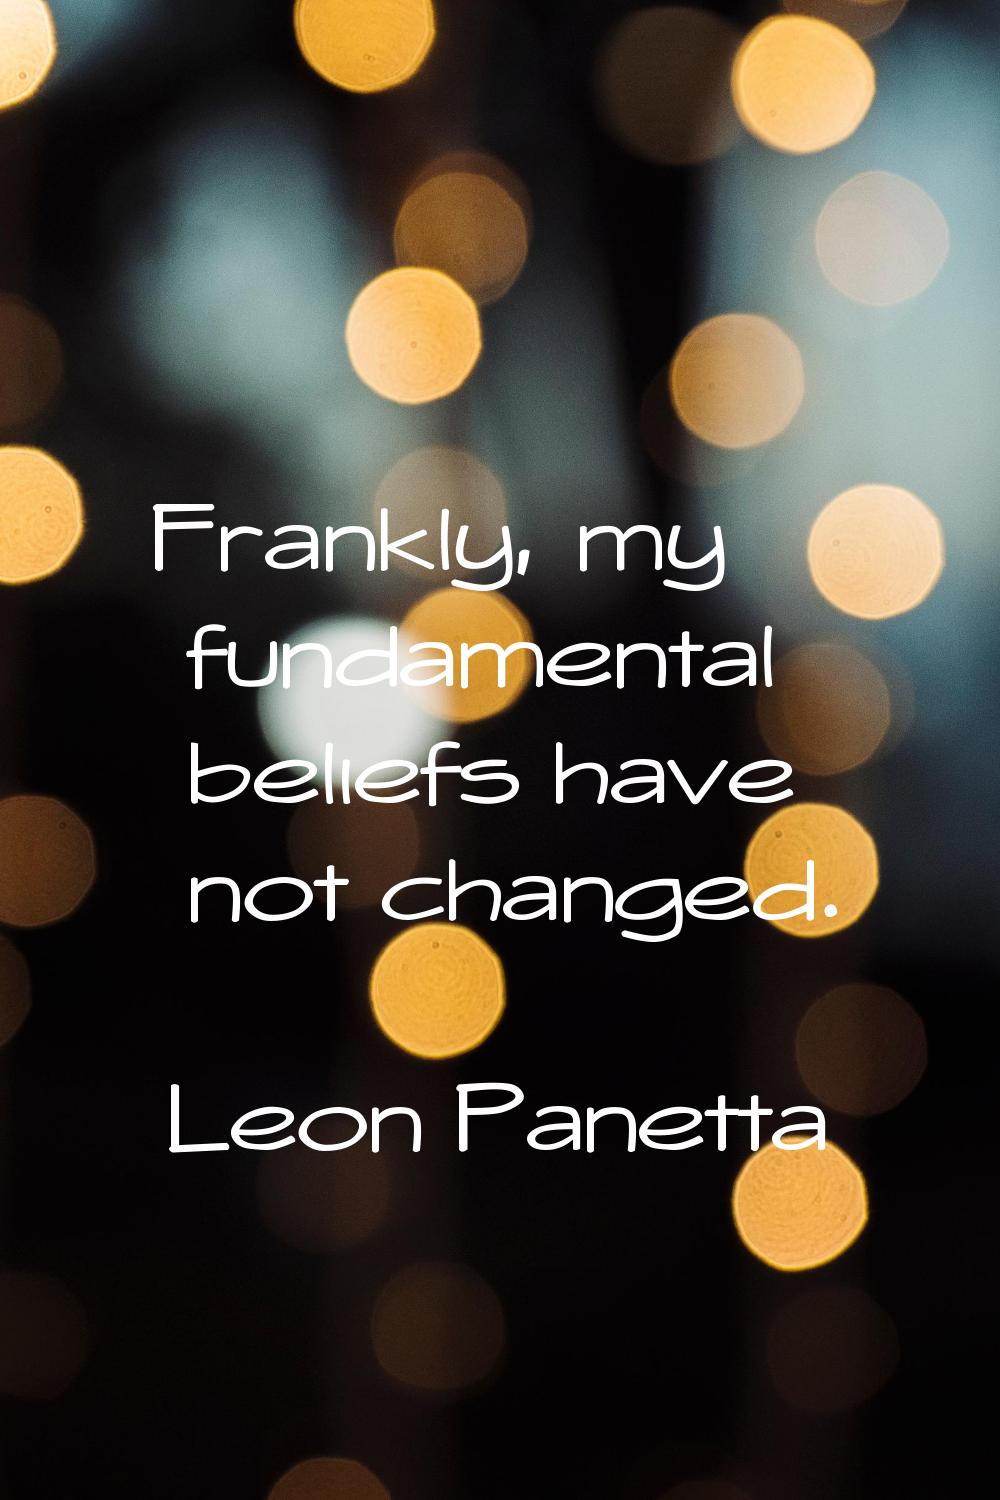 Frankly, my fundamental beliefs have not changed.